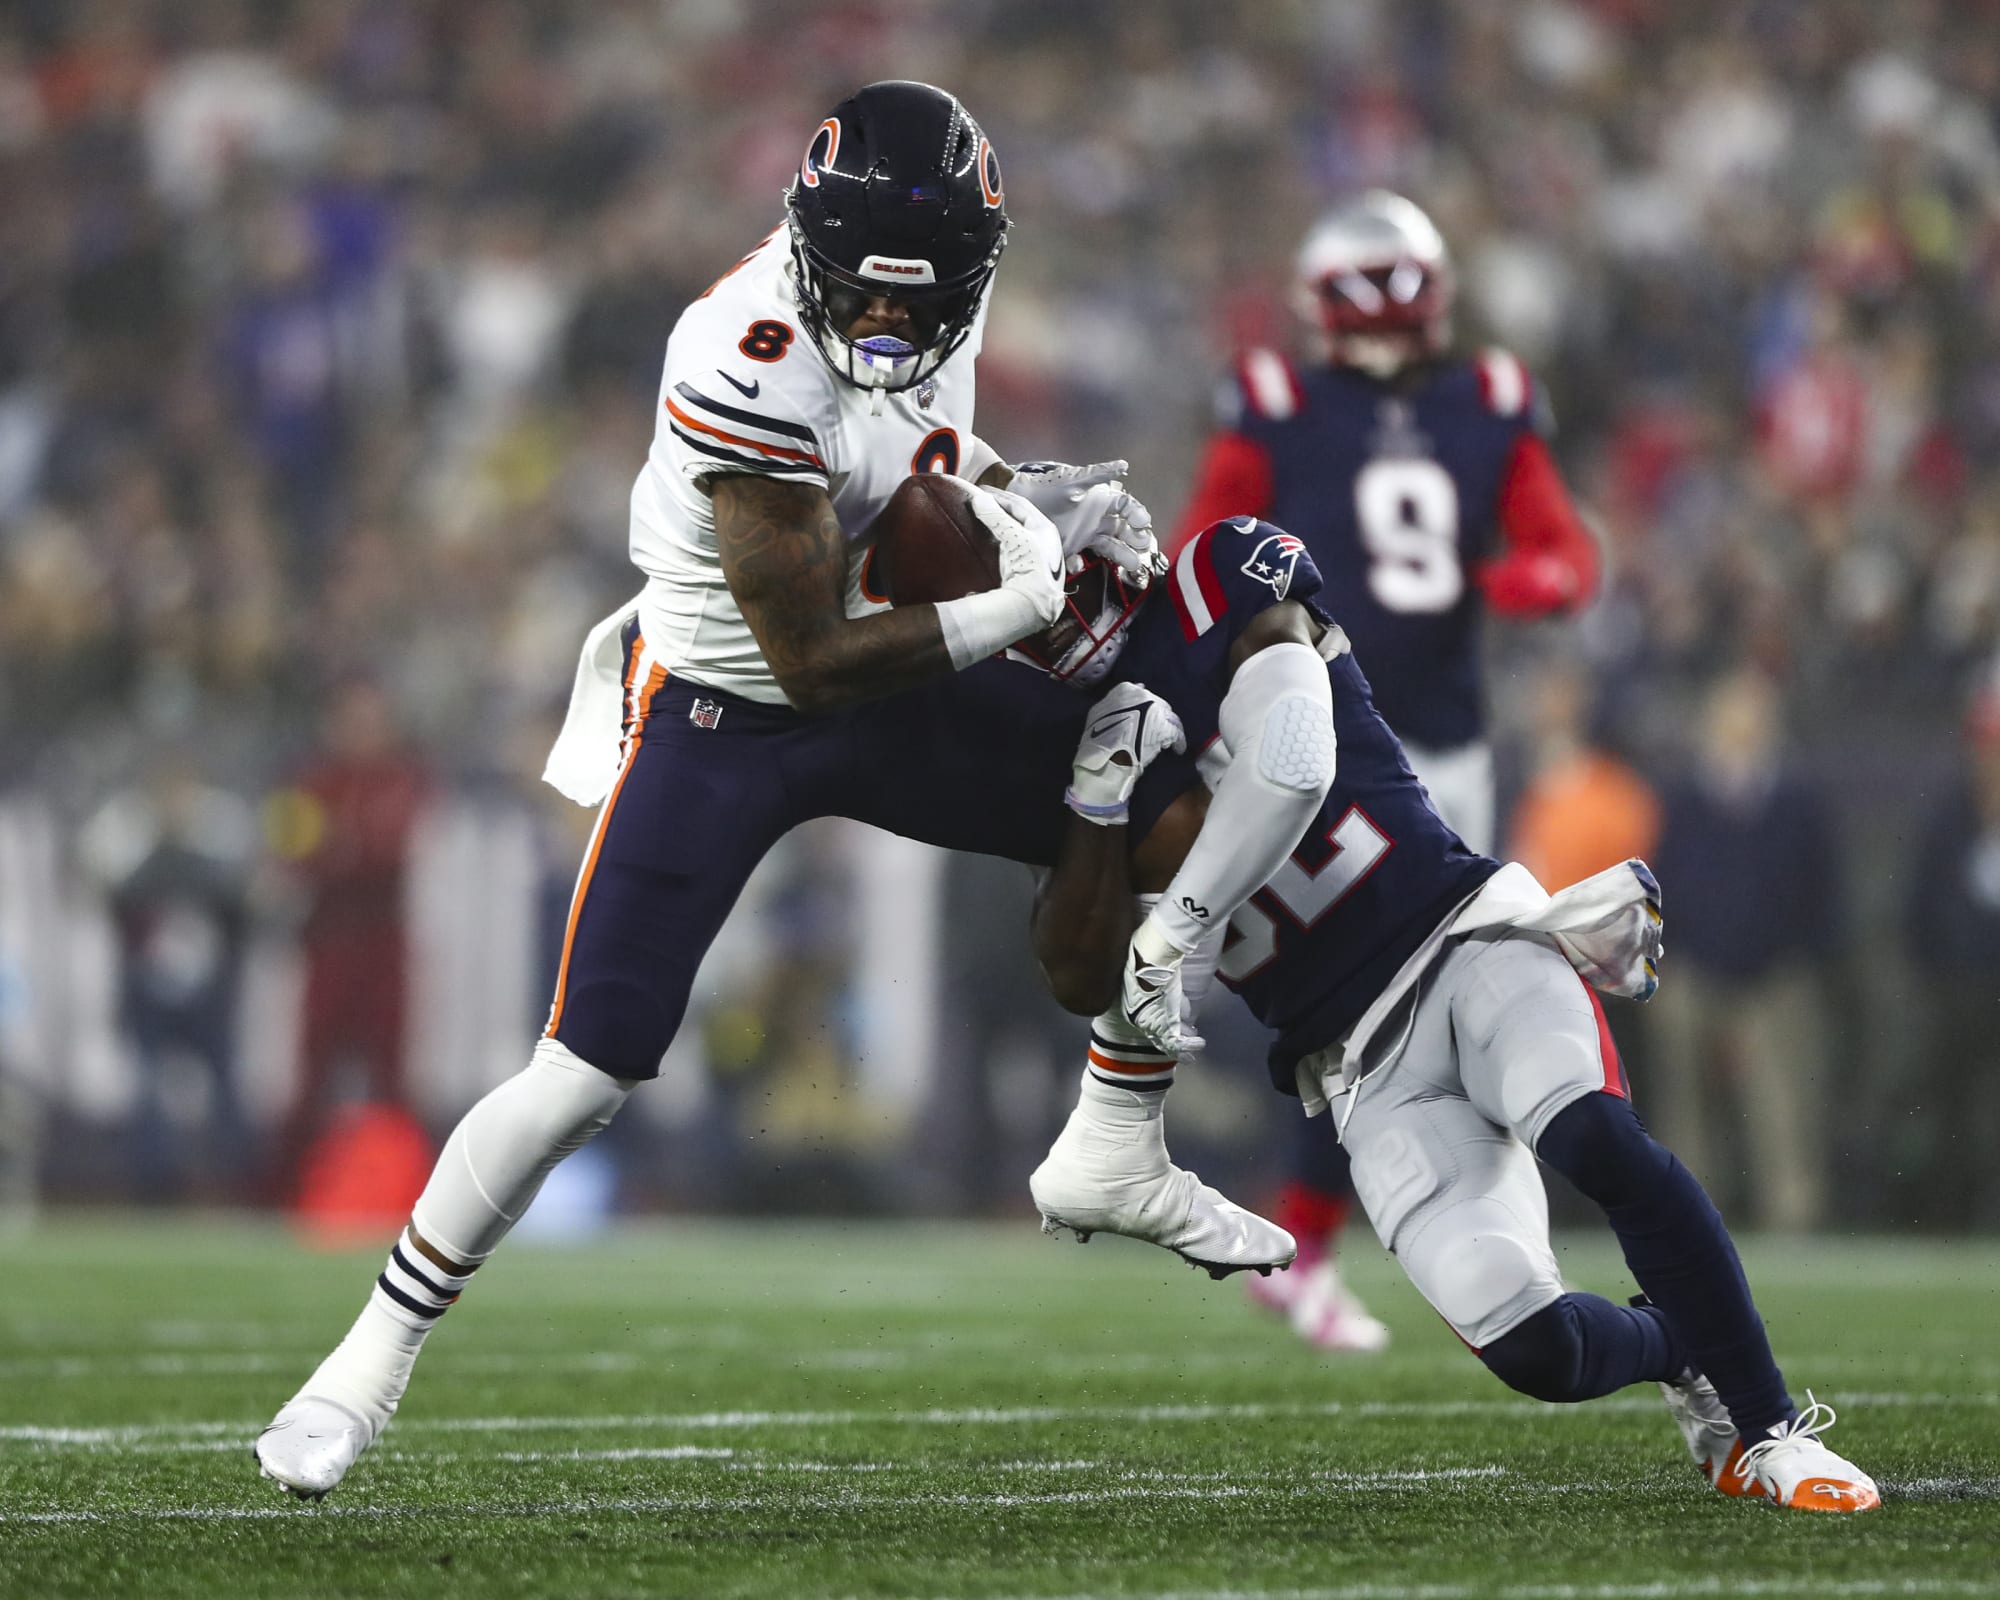 Why N’Keal Harry is unlikely to re-sign with Chicago Bears